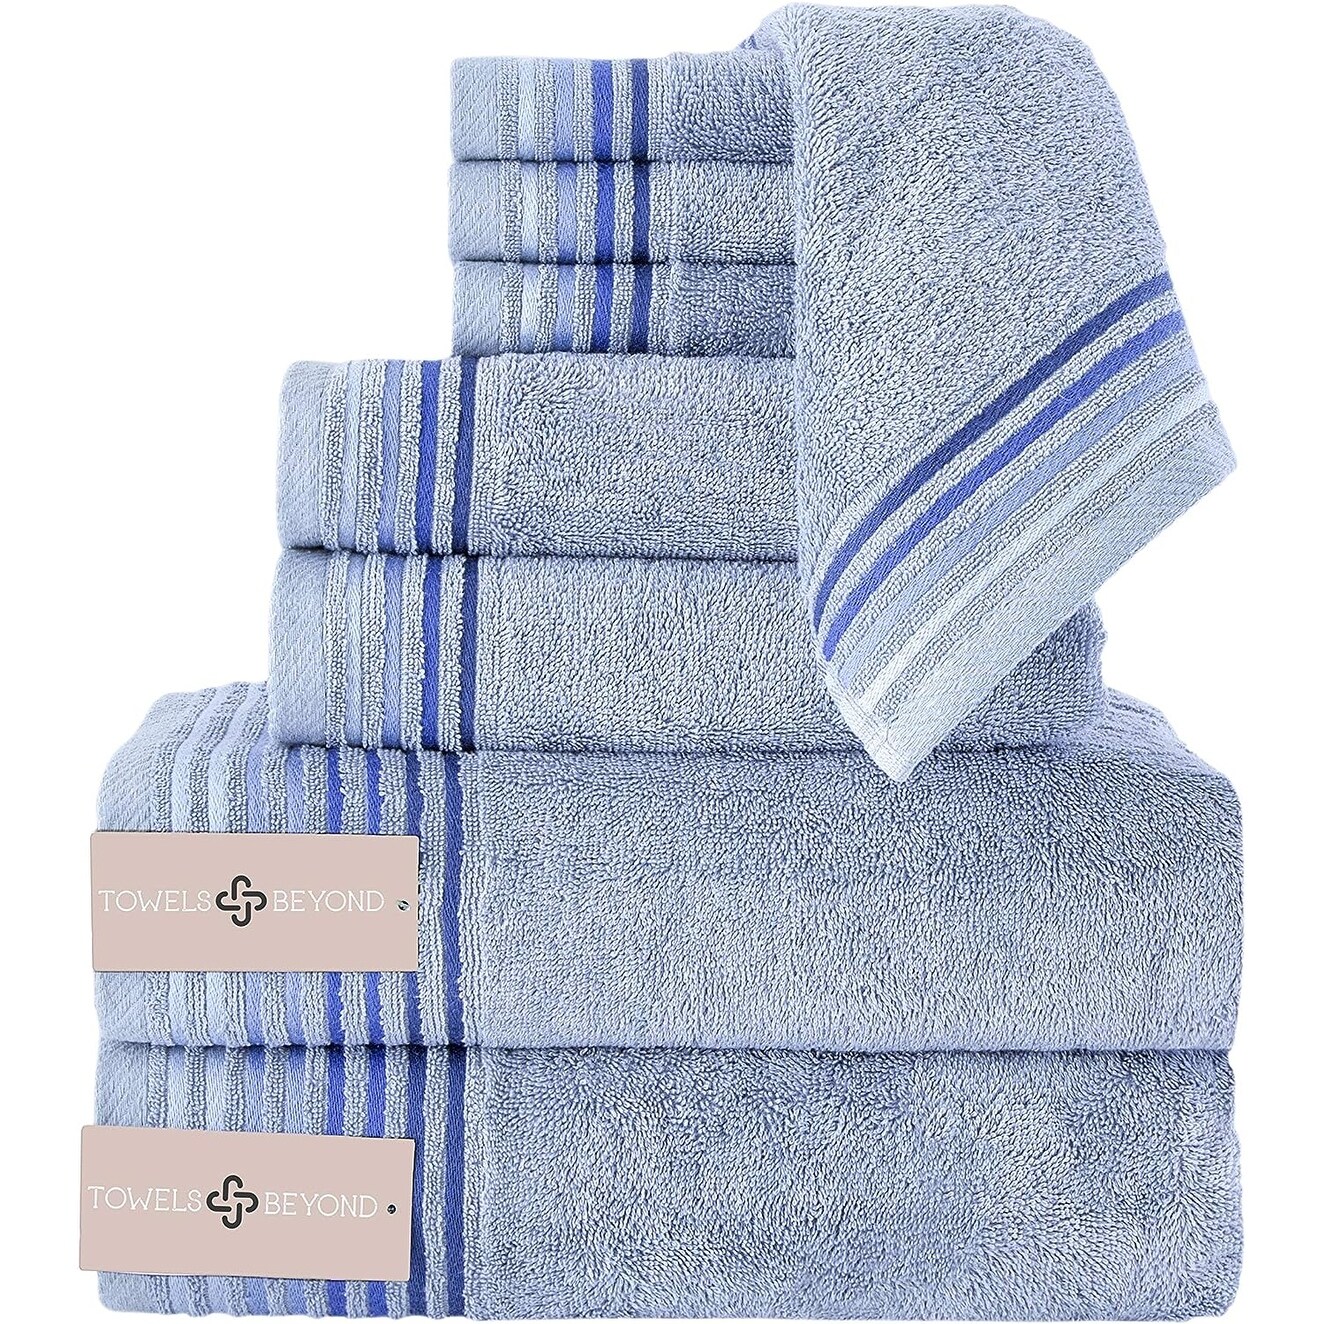 https://ak1.ostkcdn.com/images/products/is/images/direct/fbbf810831f0a910278e68f13c9f5b92ec430d47/Royal-Turkish-Towels-Turkish-Cotton-Bamboo-Bathroom-Towel---Heavy-Duty-Soft-and-Luxurious-Towel-Set-%28Set-of-8%29.jpg